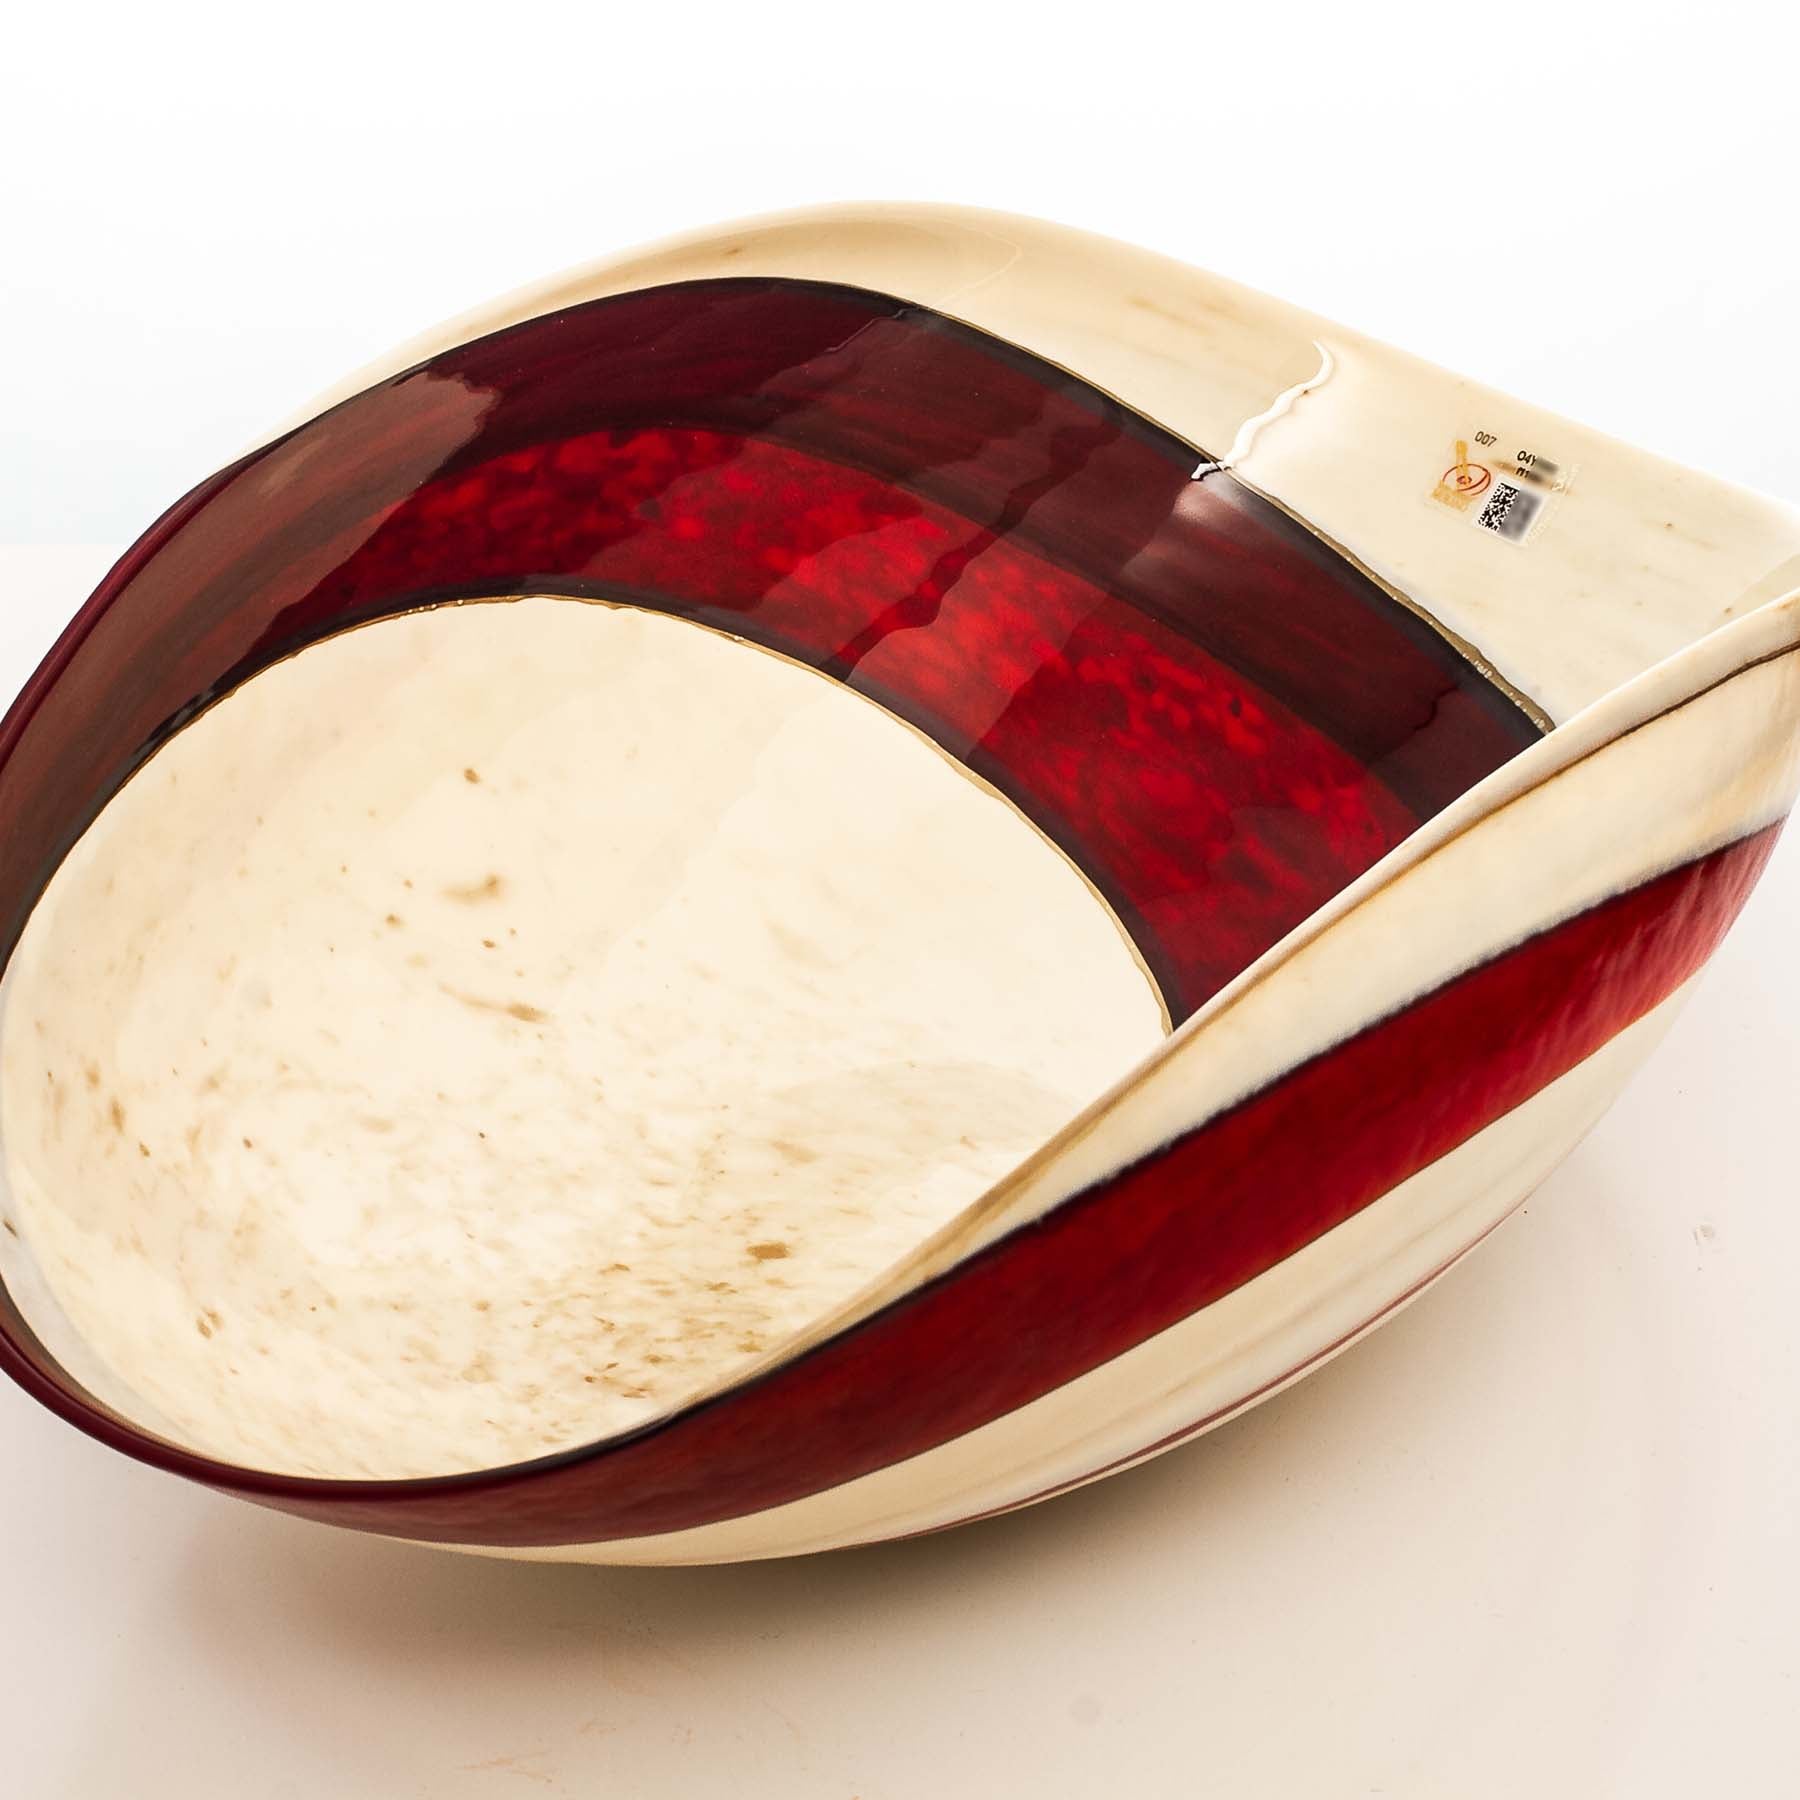 The Red collection - Folded Glass Bowl - Glass of Murano